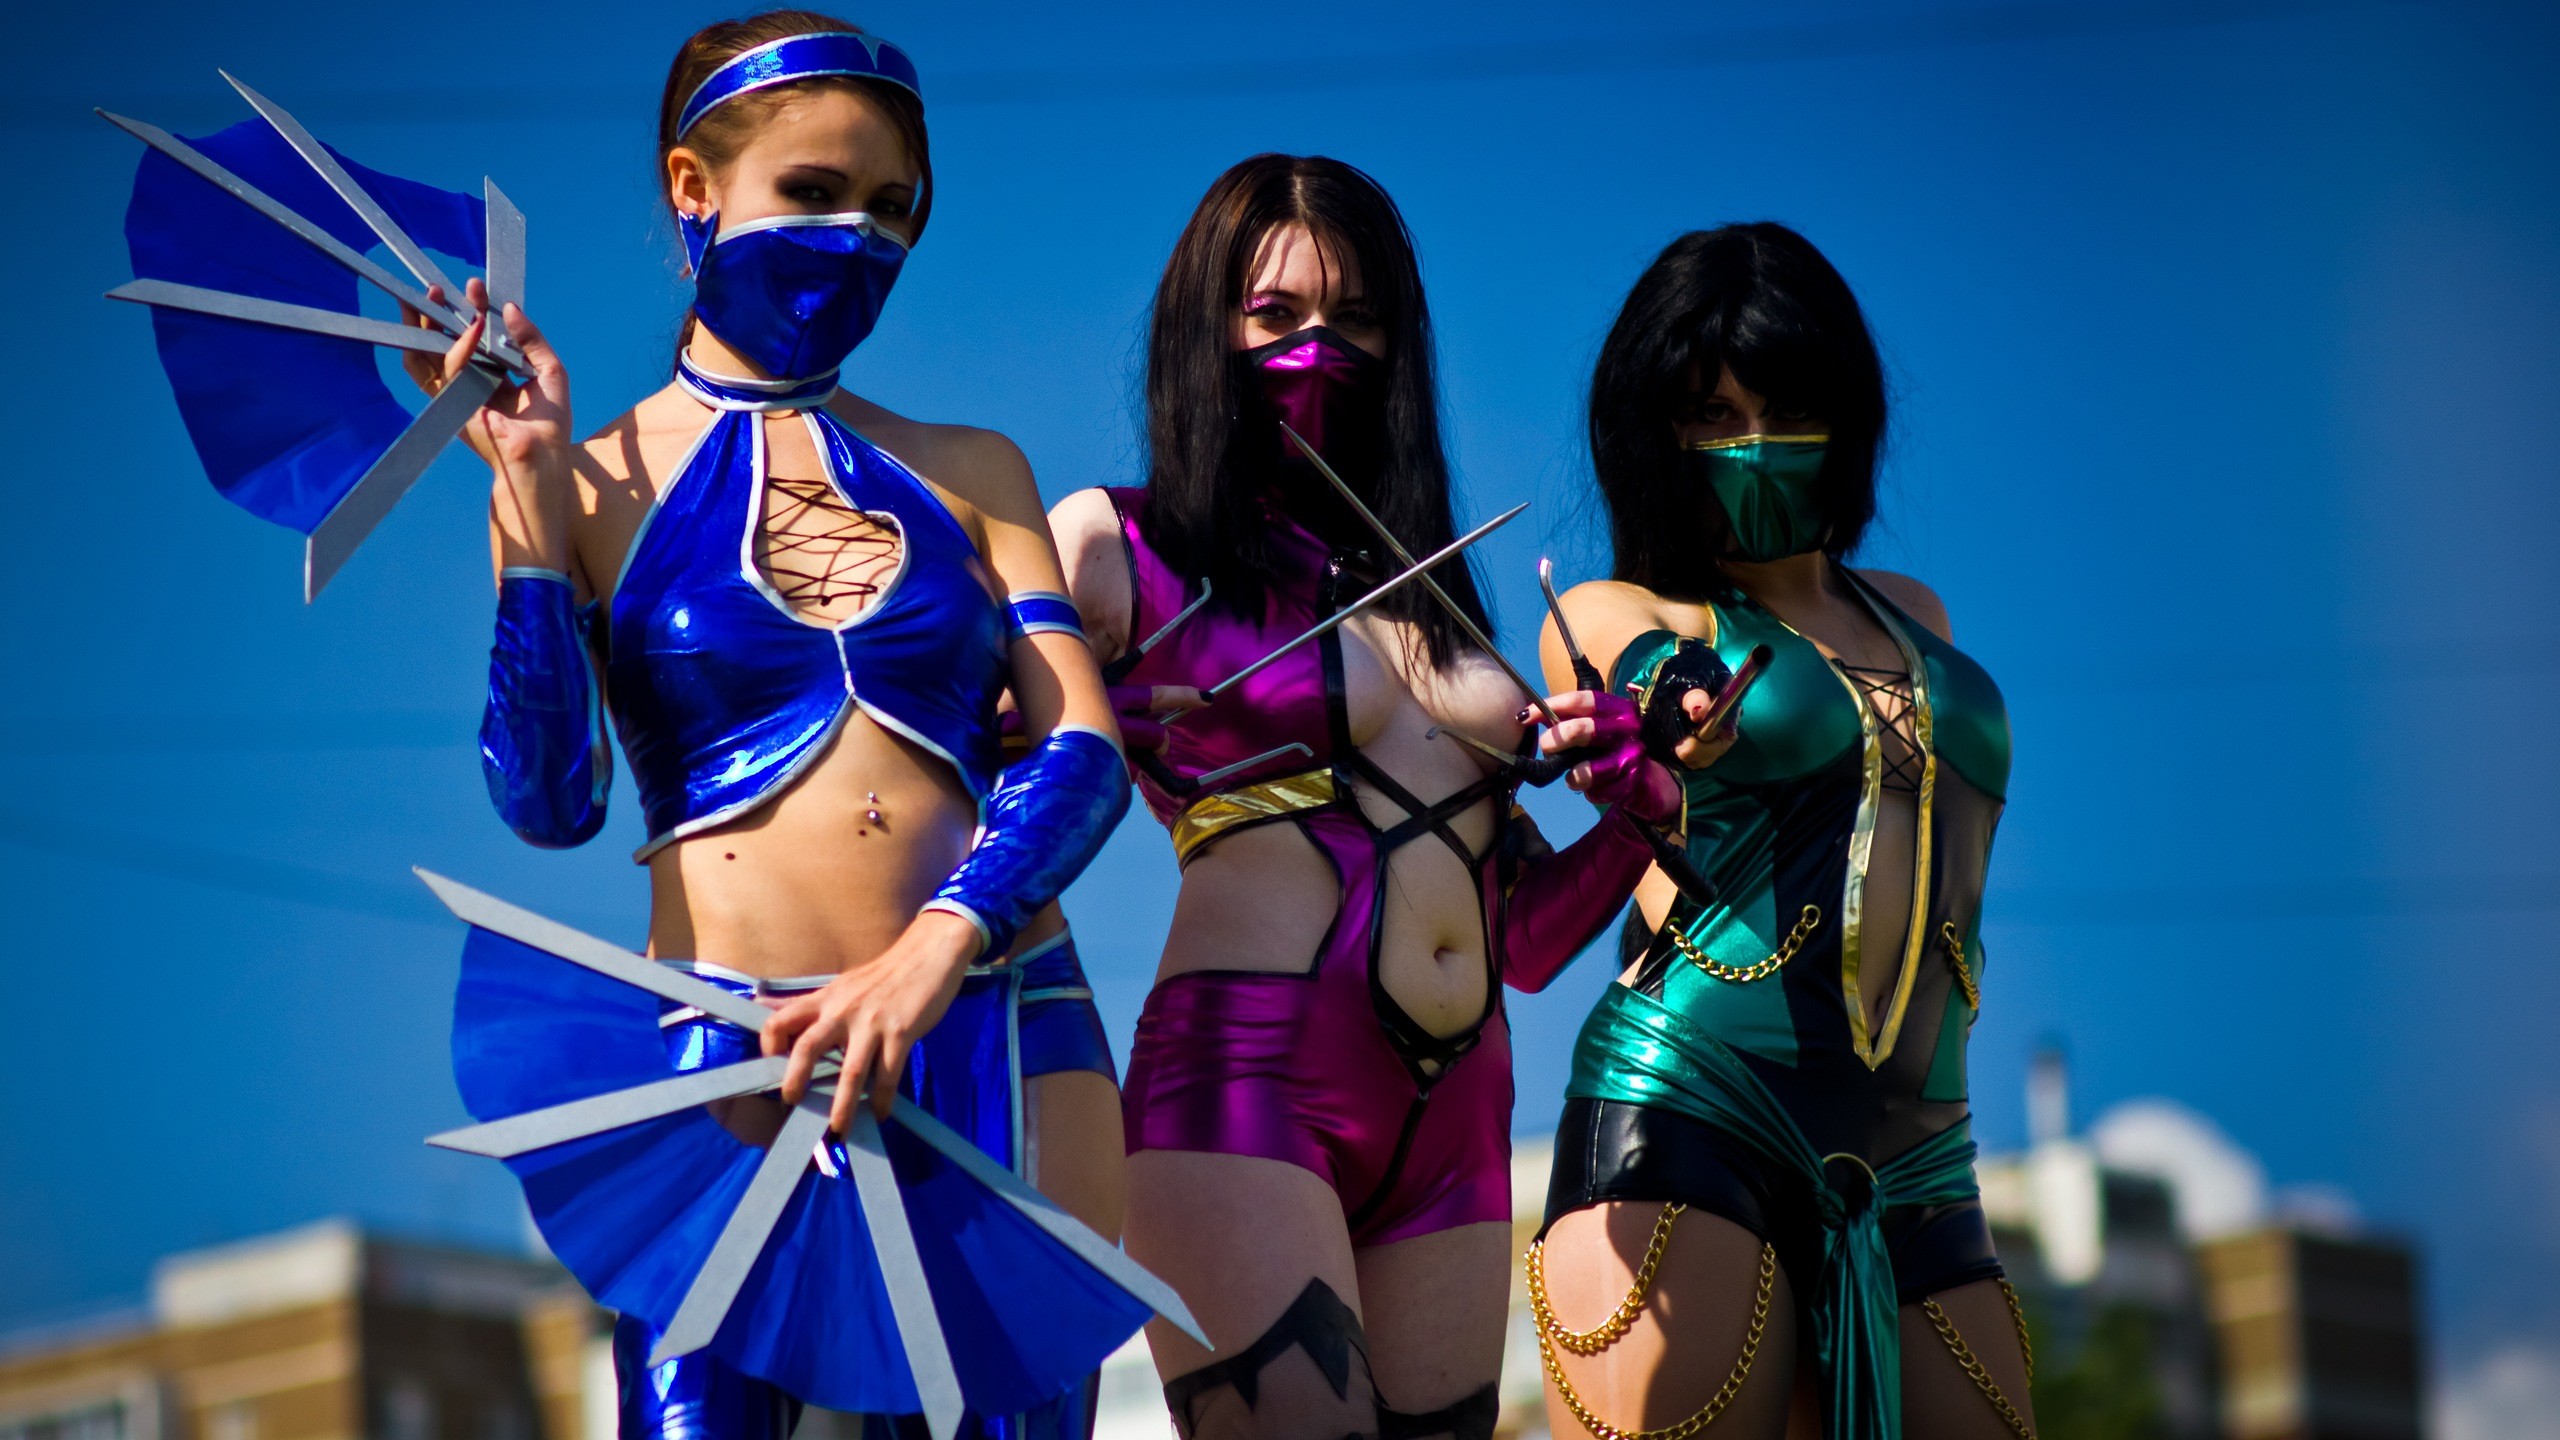 2560x1440  HD wallpaper of a Kitana, Mileena and Jade cosplay from the Mortal  Kombat video game series. The widescreen version (2240x1400) of the  wallpaper ...